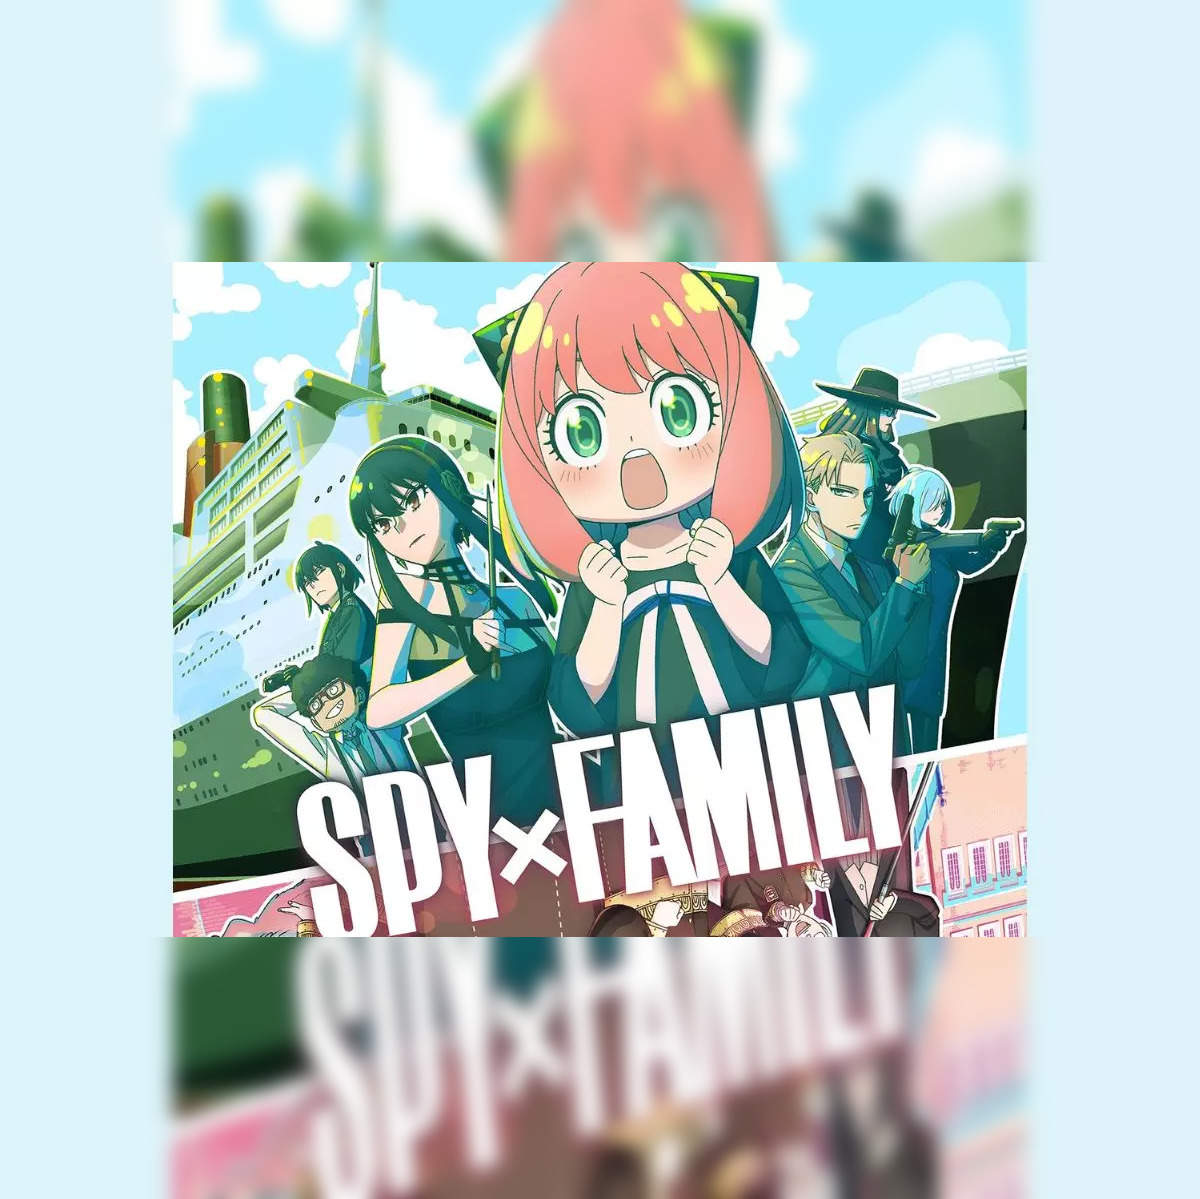 Spy x Family Releases Episode 3: Watch Online